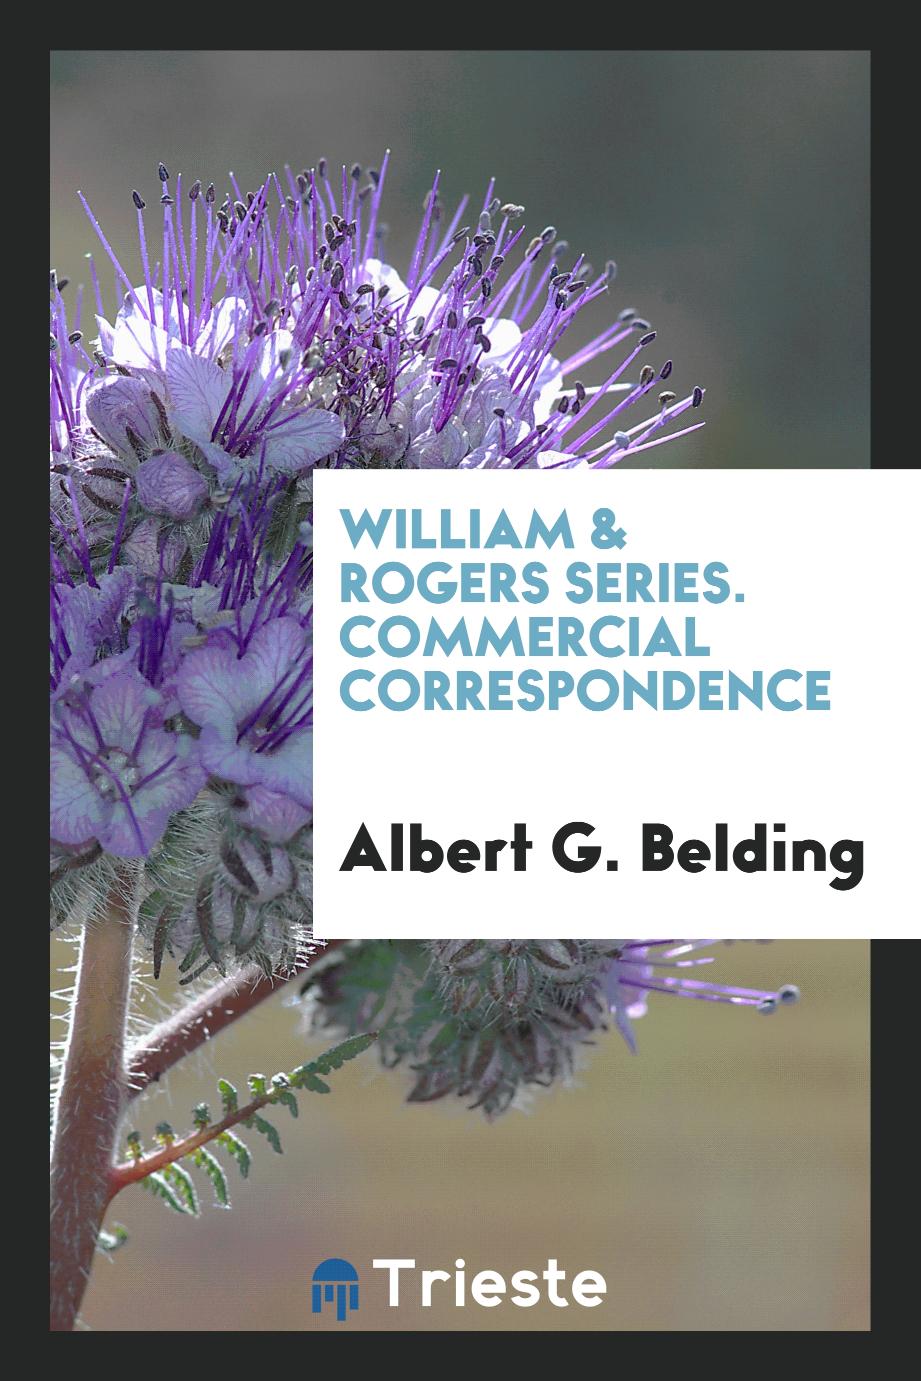 William & Rogers Series. Commercial Correspondence